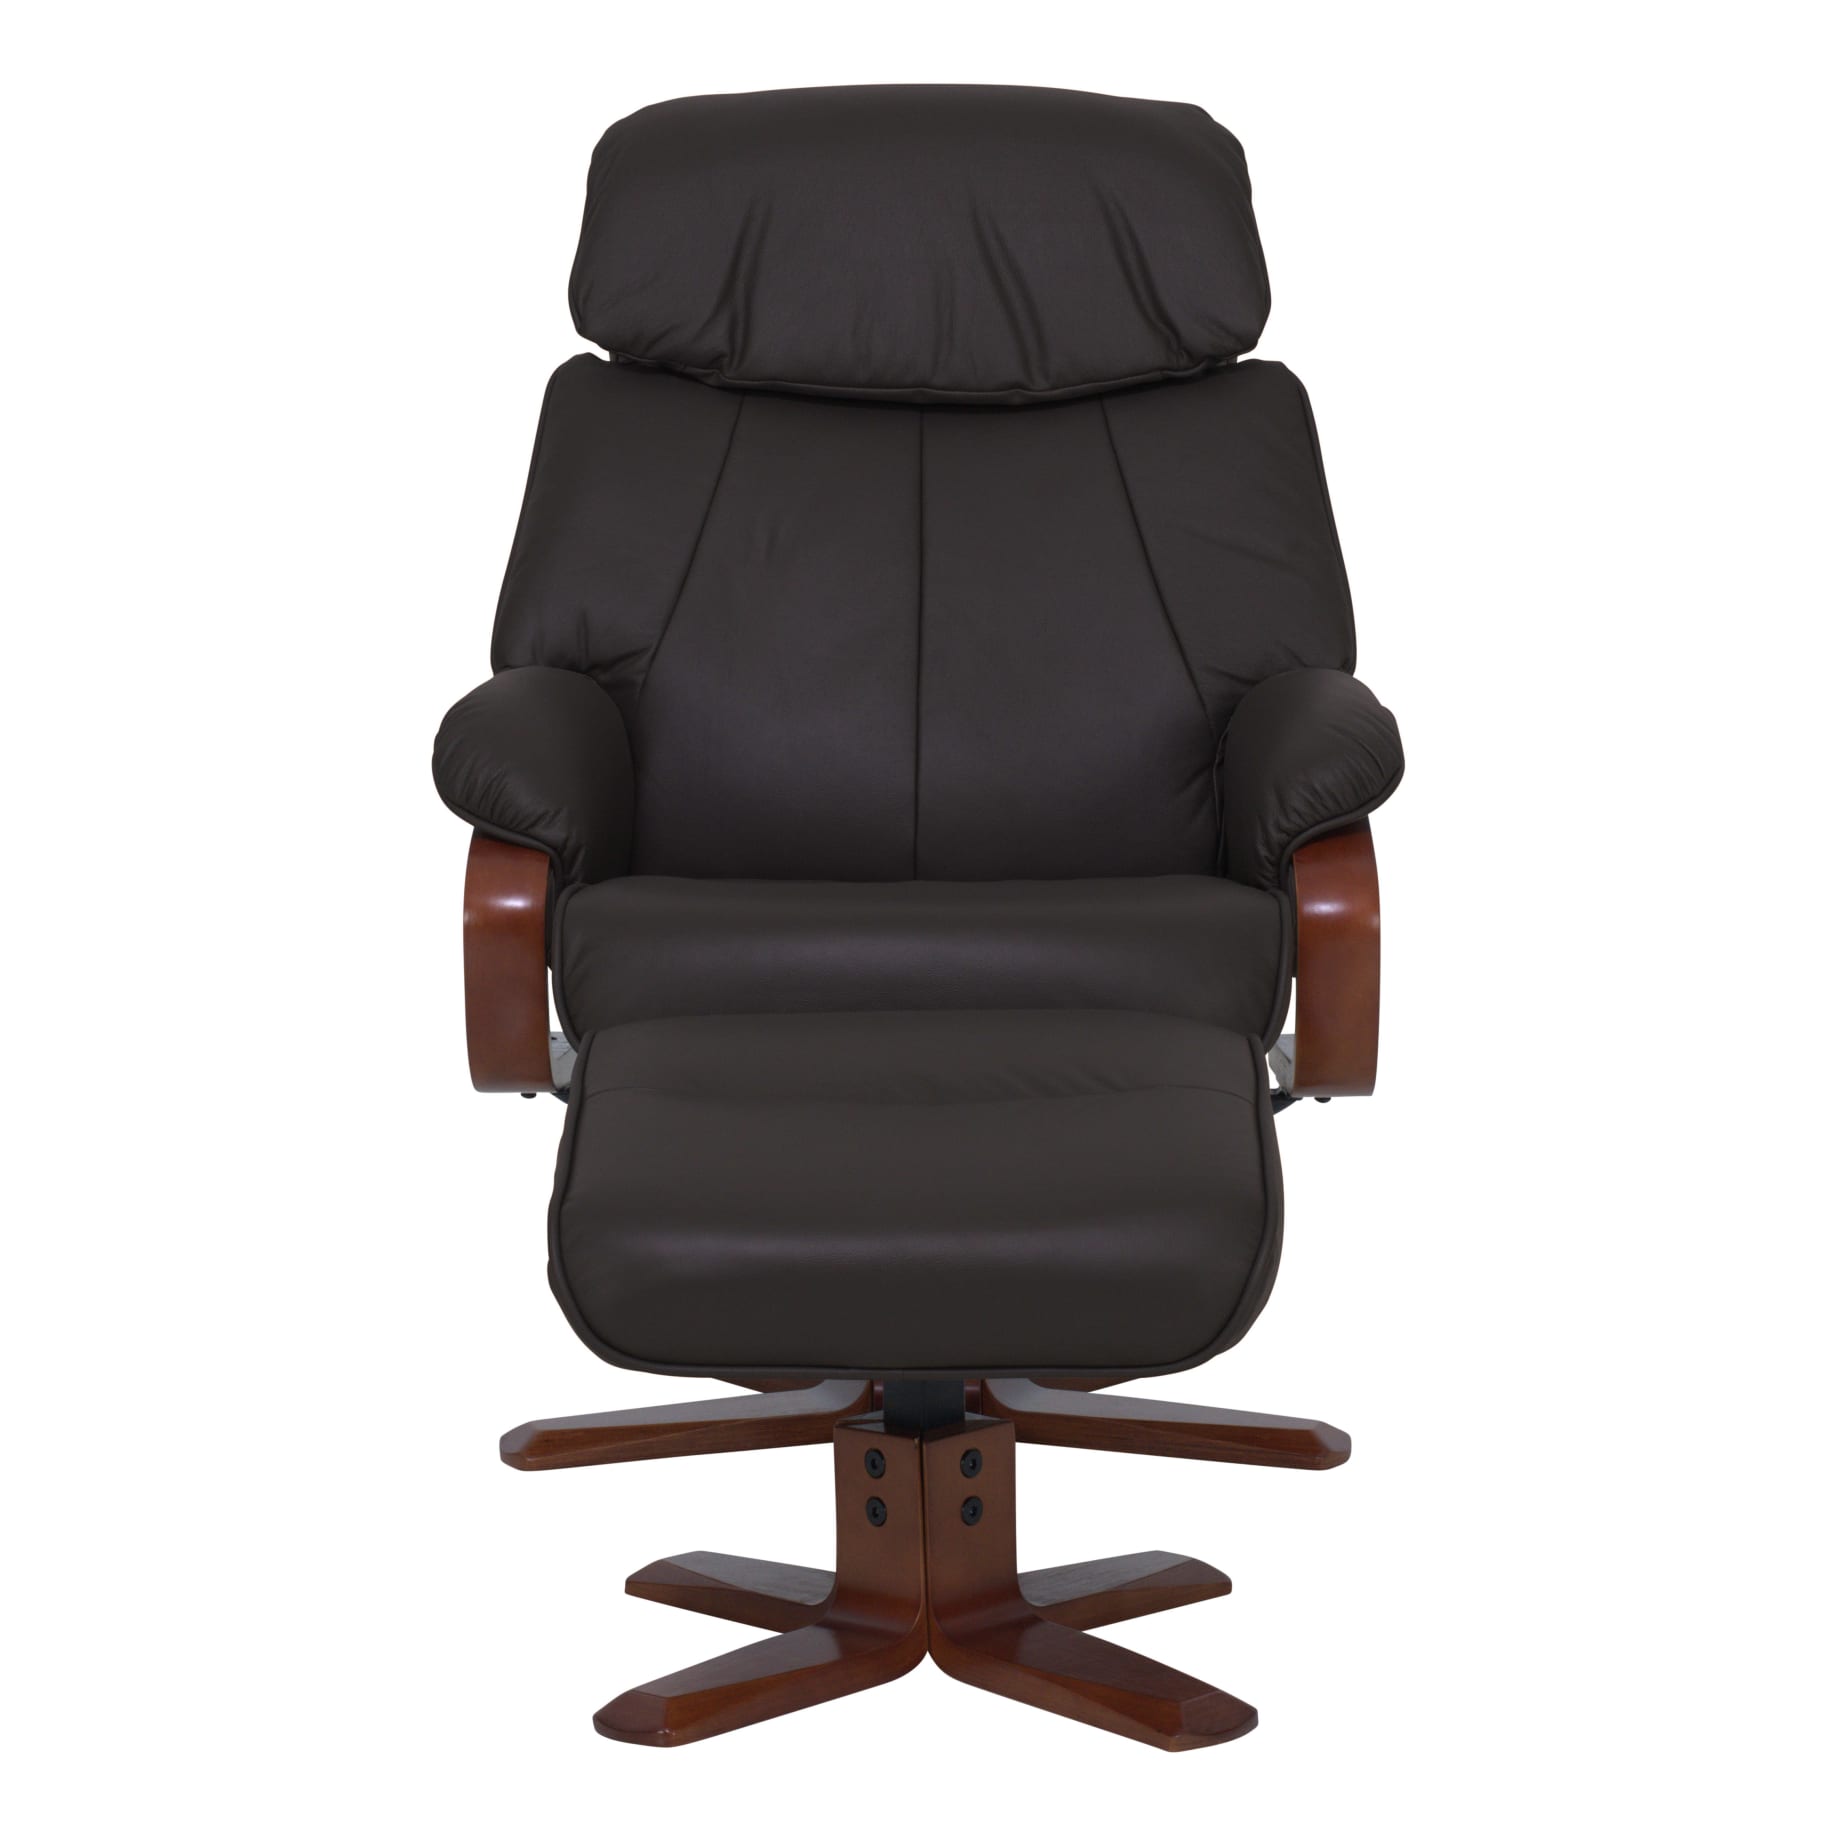 Turner Recliner + Ottoman in Chocolate/ Chocolate